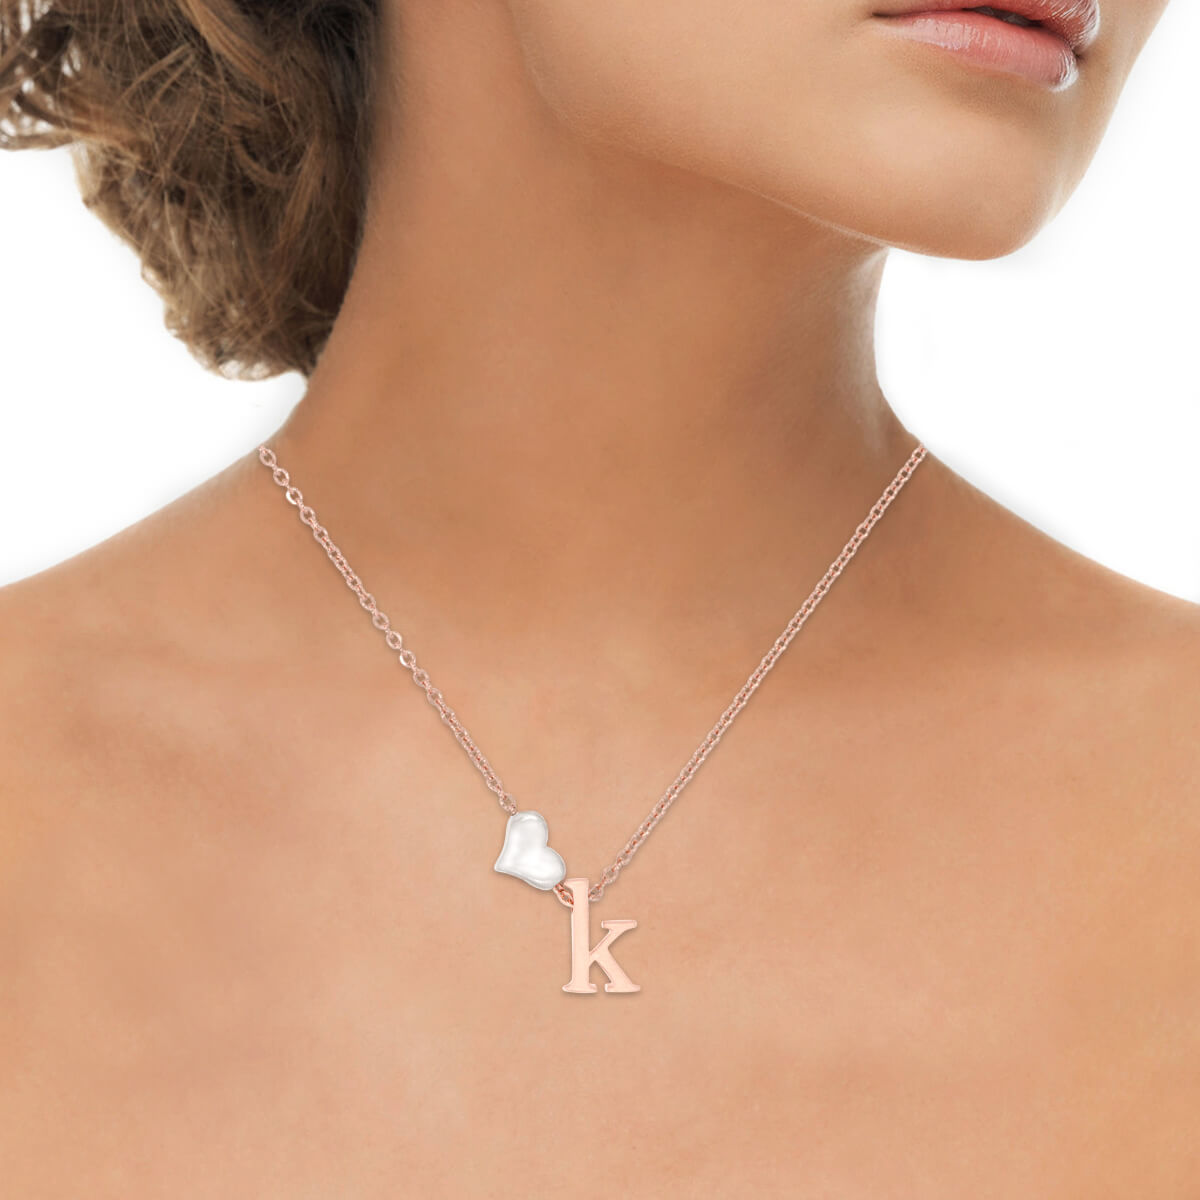 Sterling Silver "K" Initial Necklace